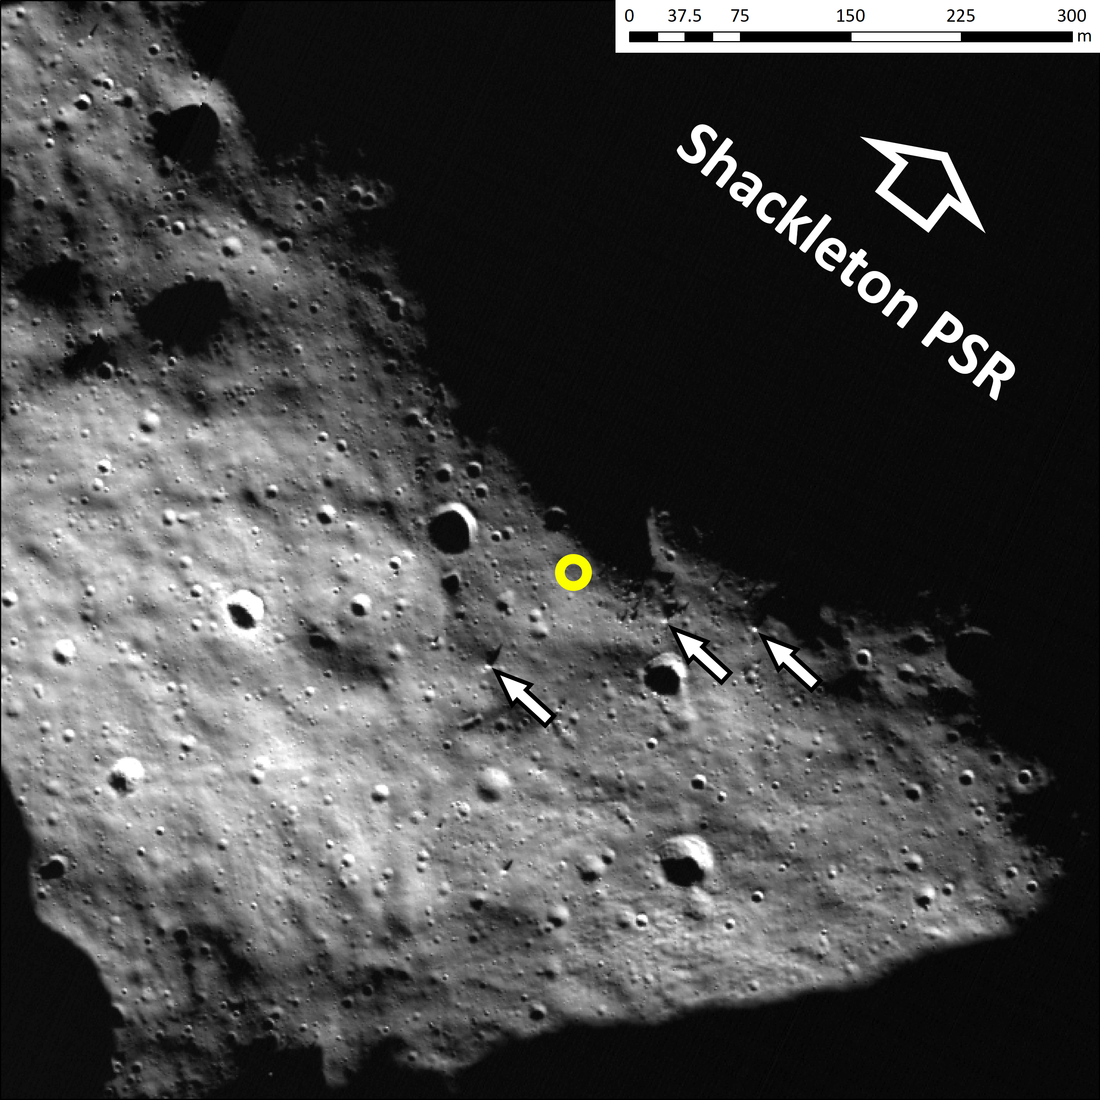 High resolution view of rim of Shackleton crater